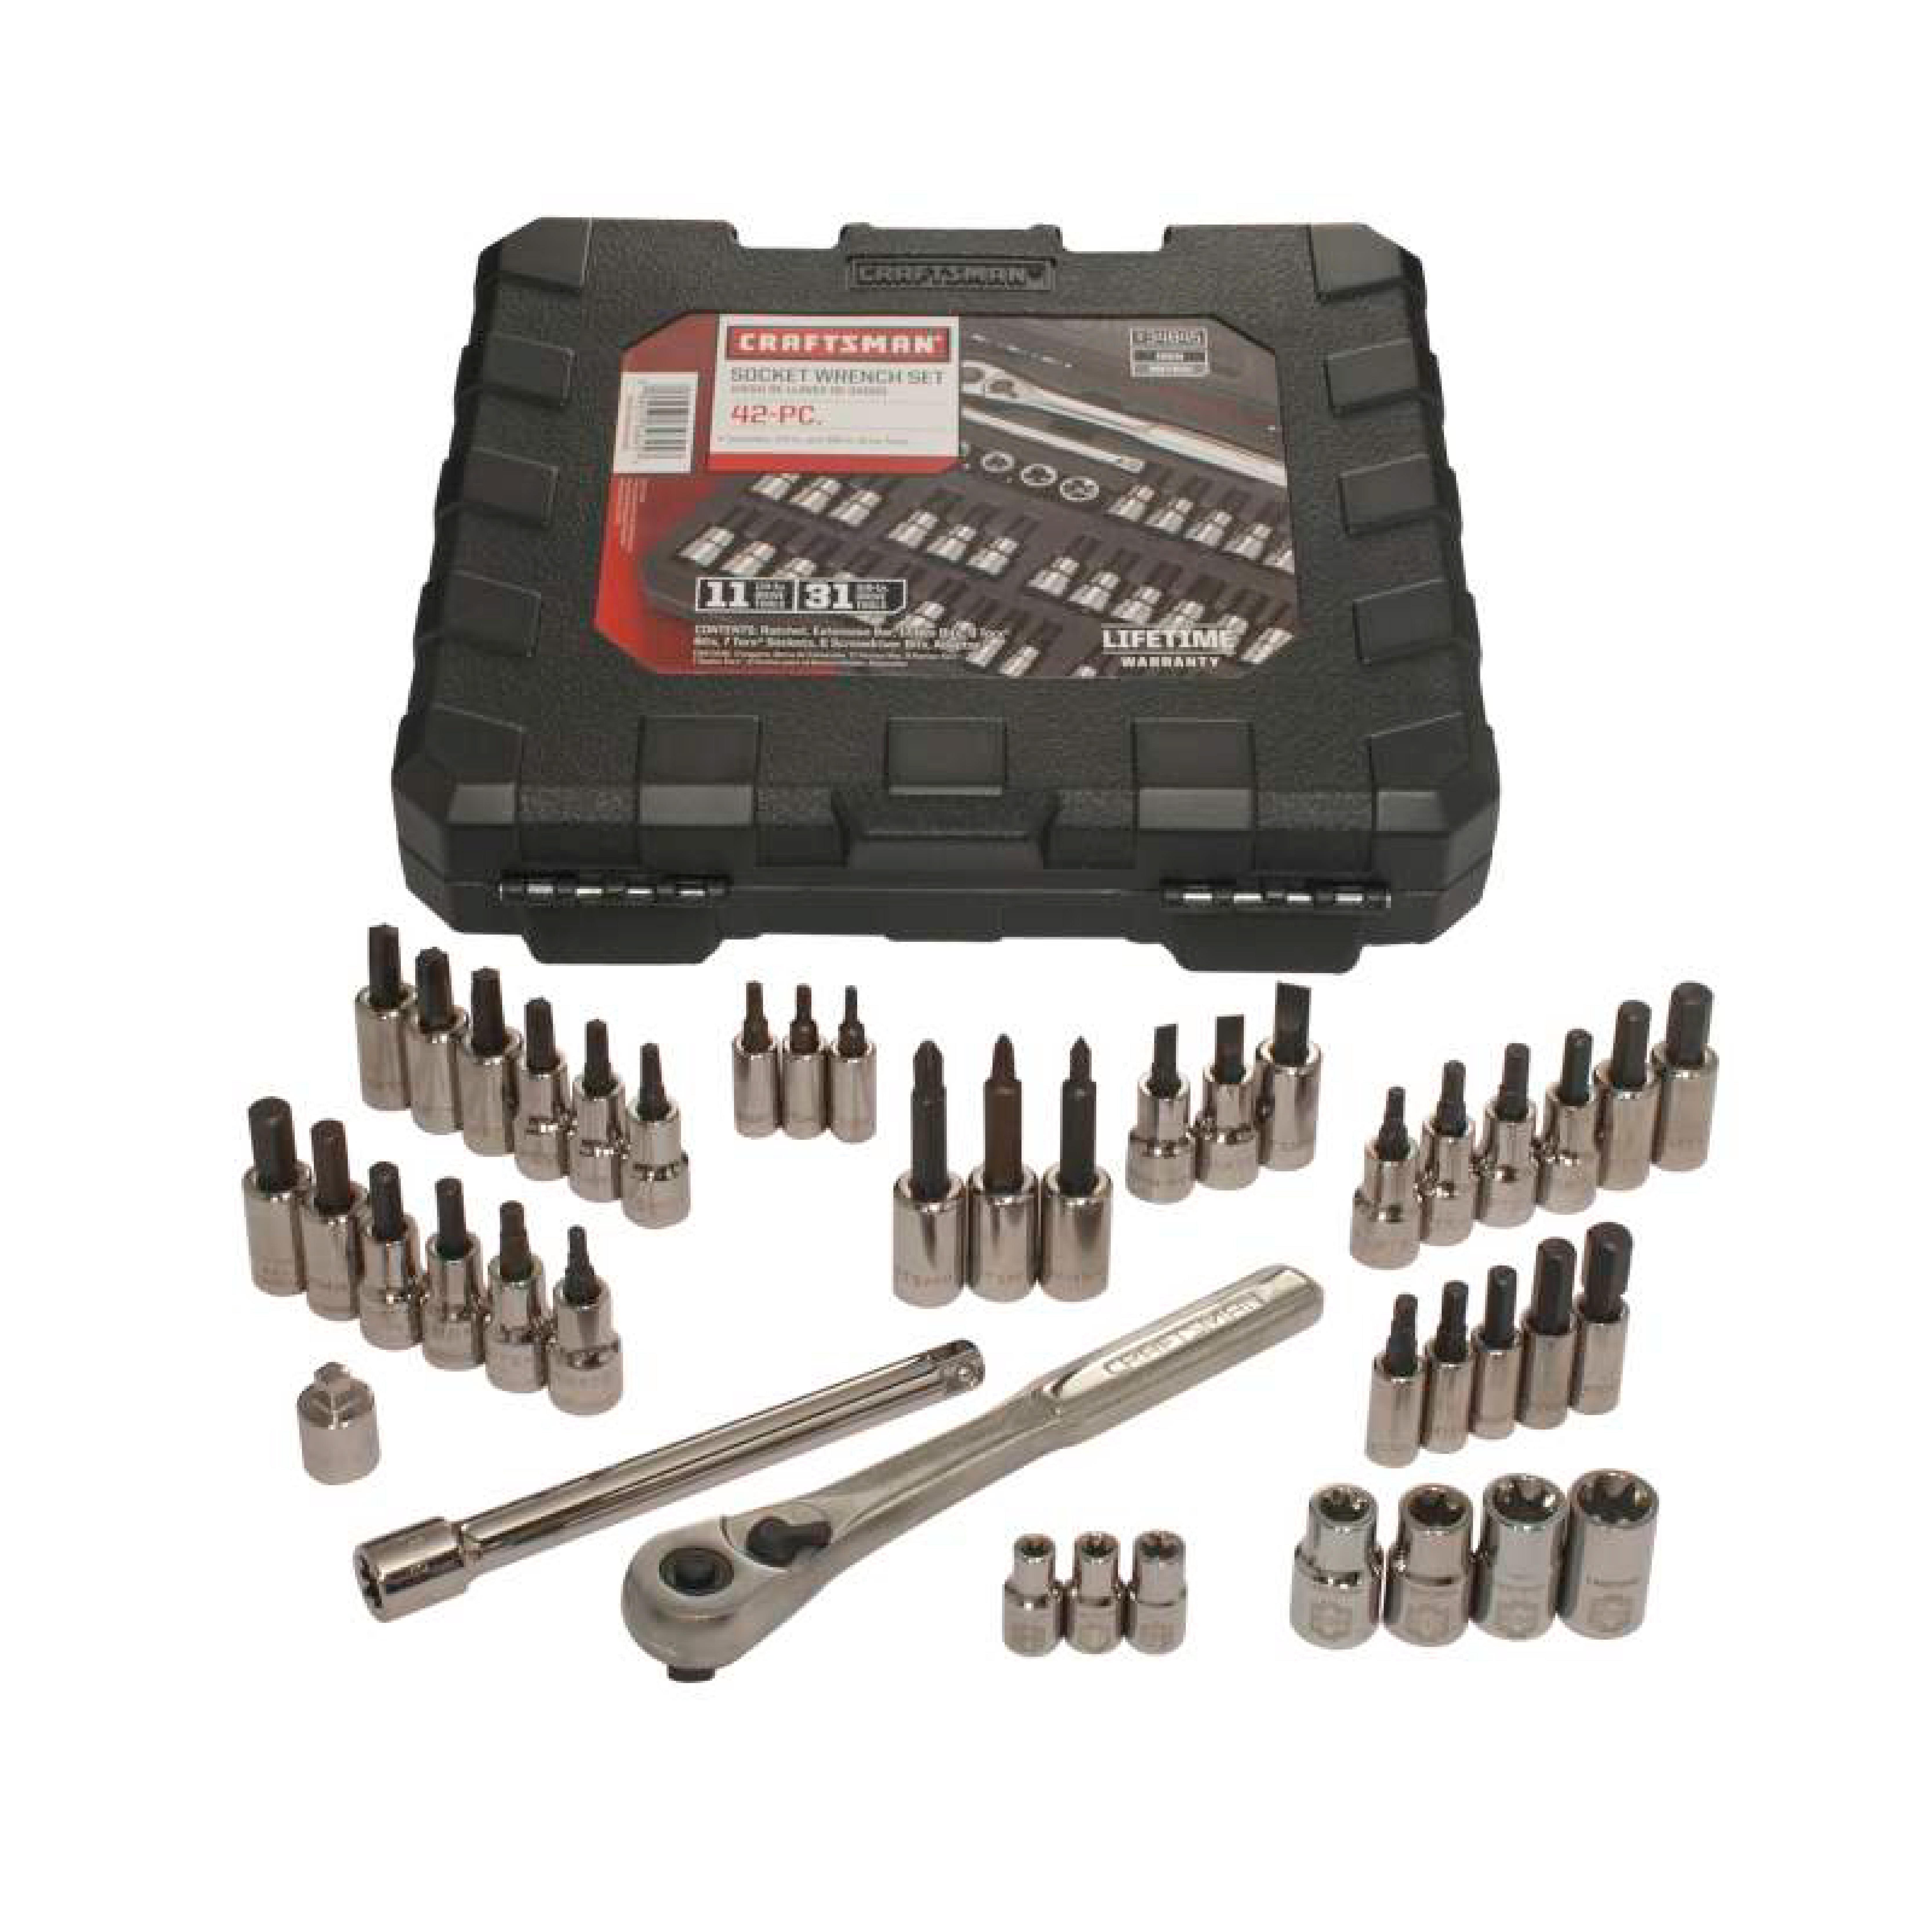 0714994348450 - 42 PIECE 1/4 AND 3/8-INCH DRIVE BIT AND TORX BIT SOCKET WRENCH SET